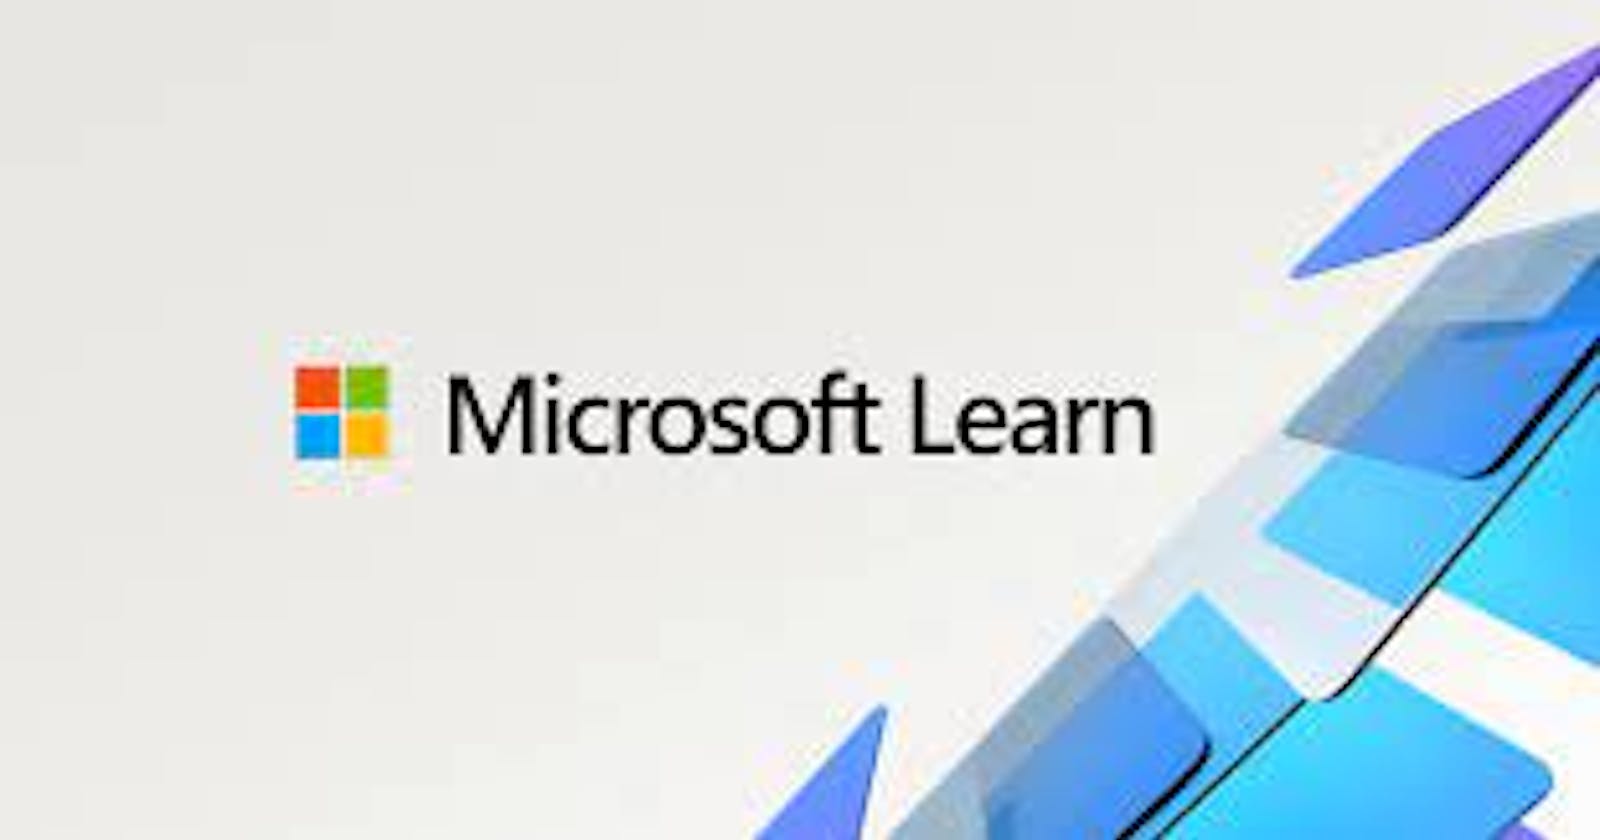 Setting up your Microsoft Learn profile